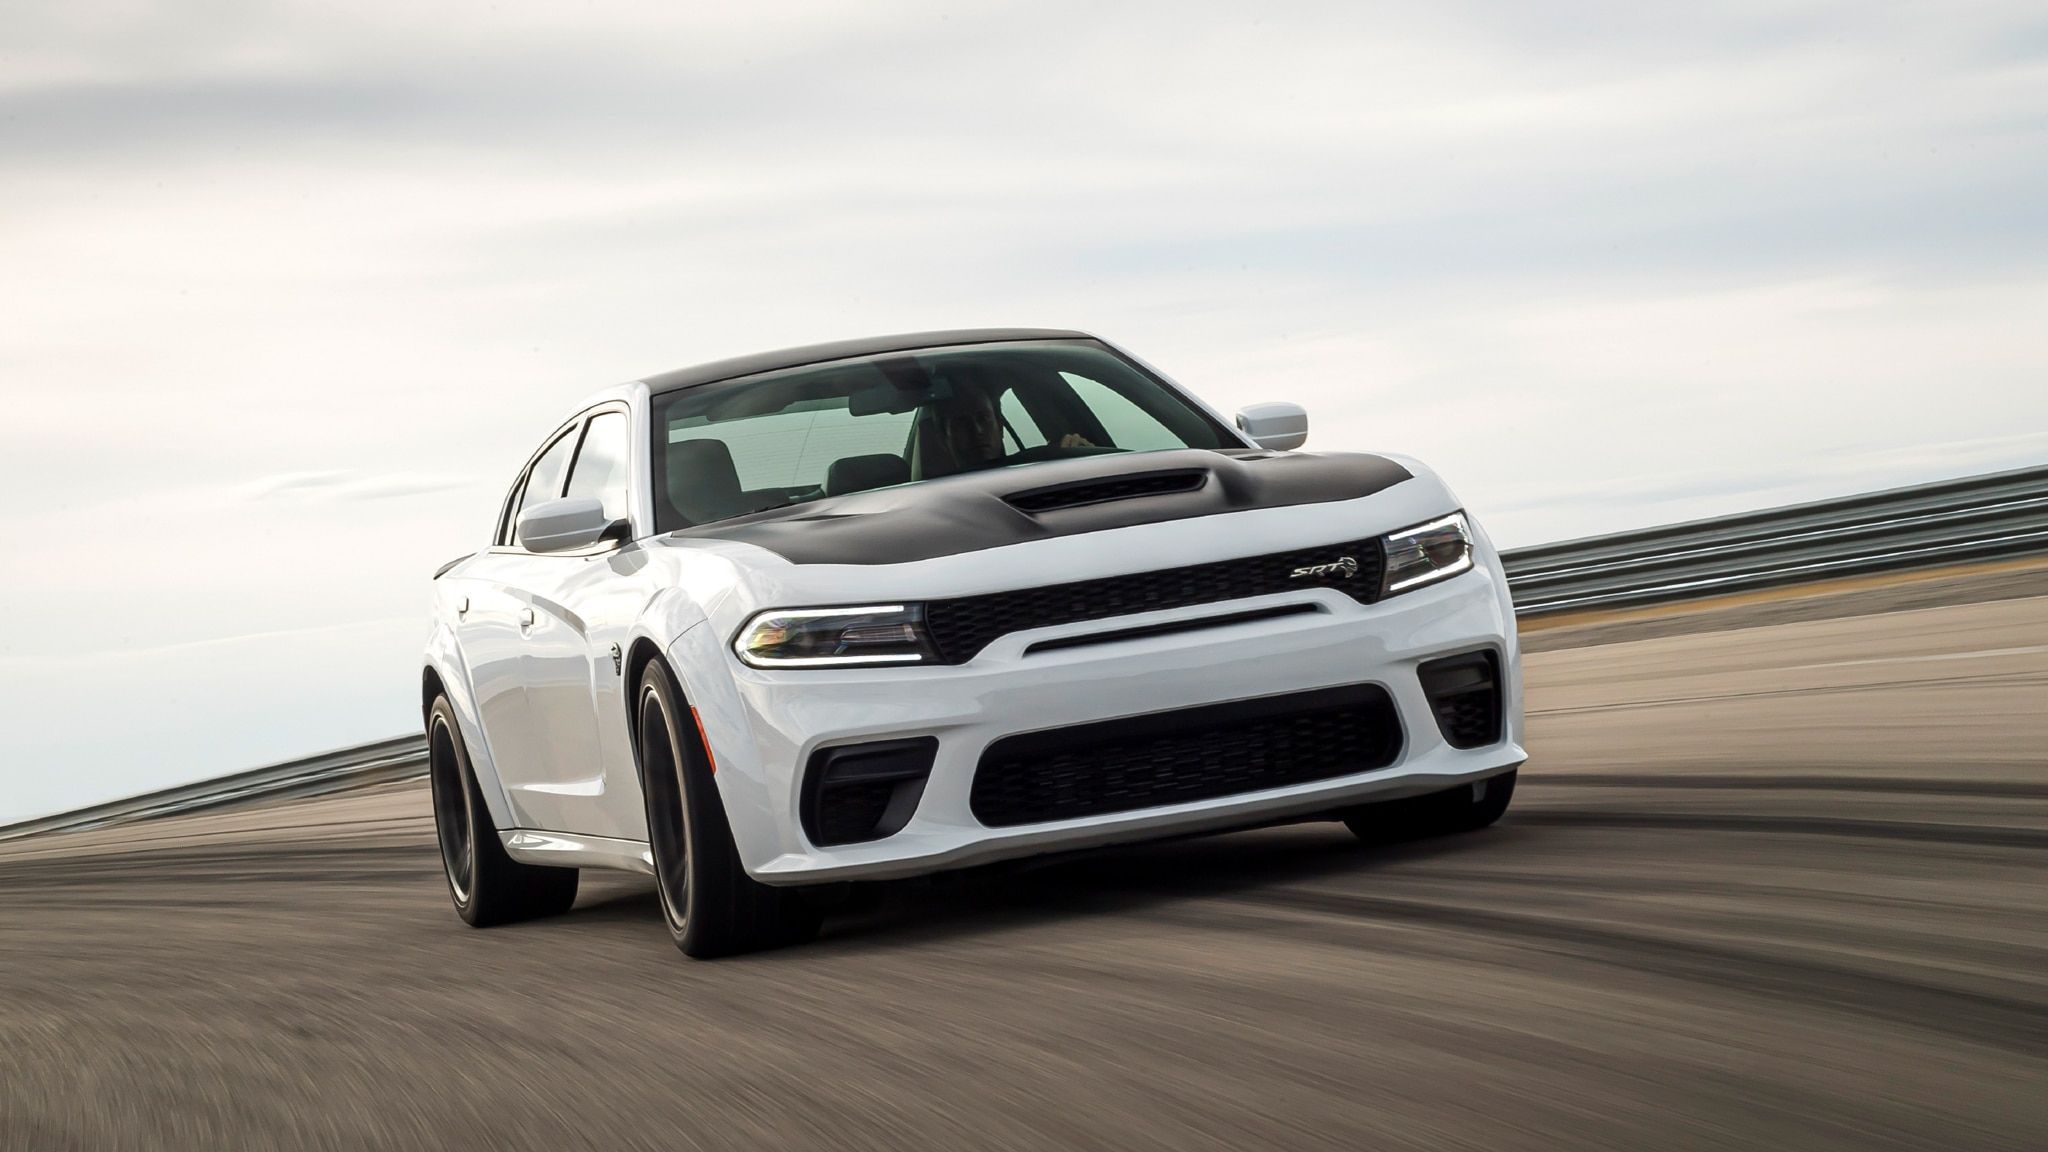 Dodge Charger SRT Hellcat Redeye: Fastest Mass Produced Sedan In The World